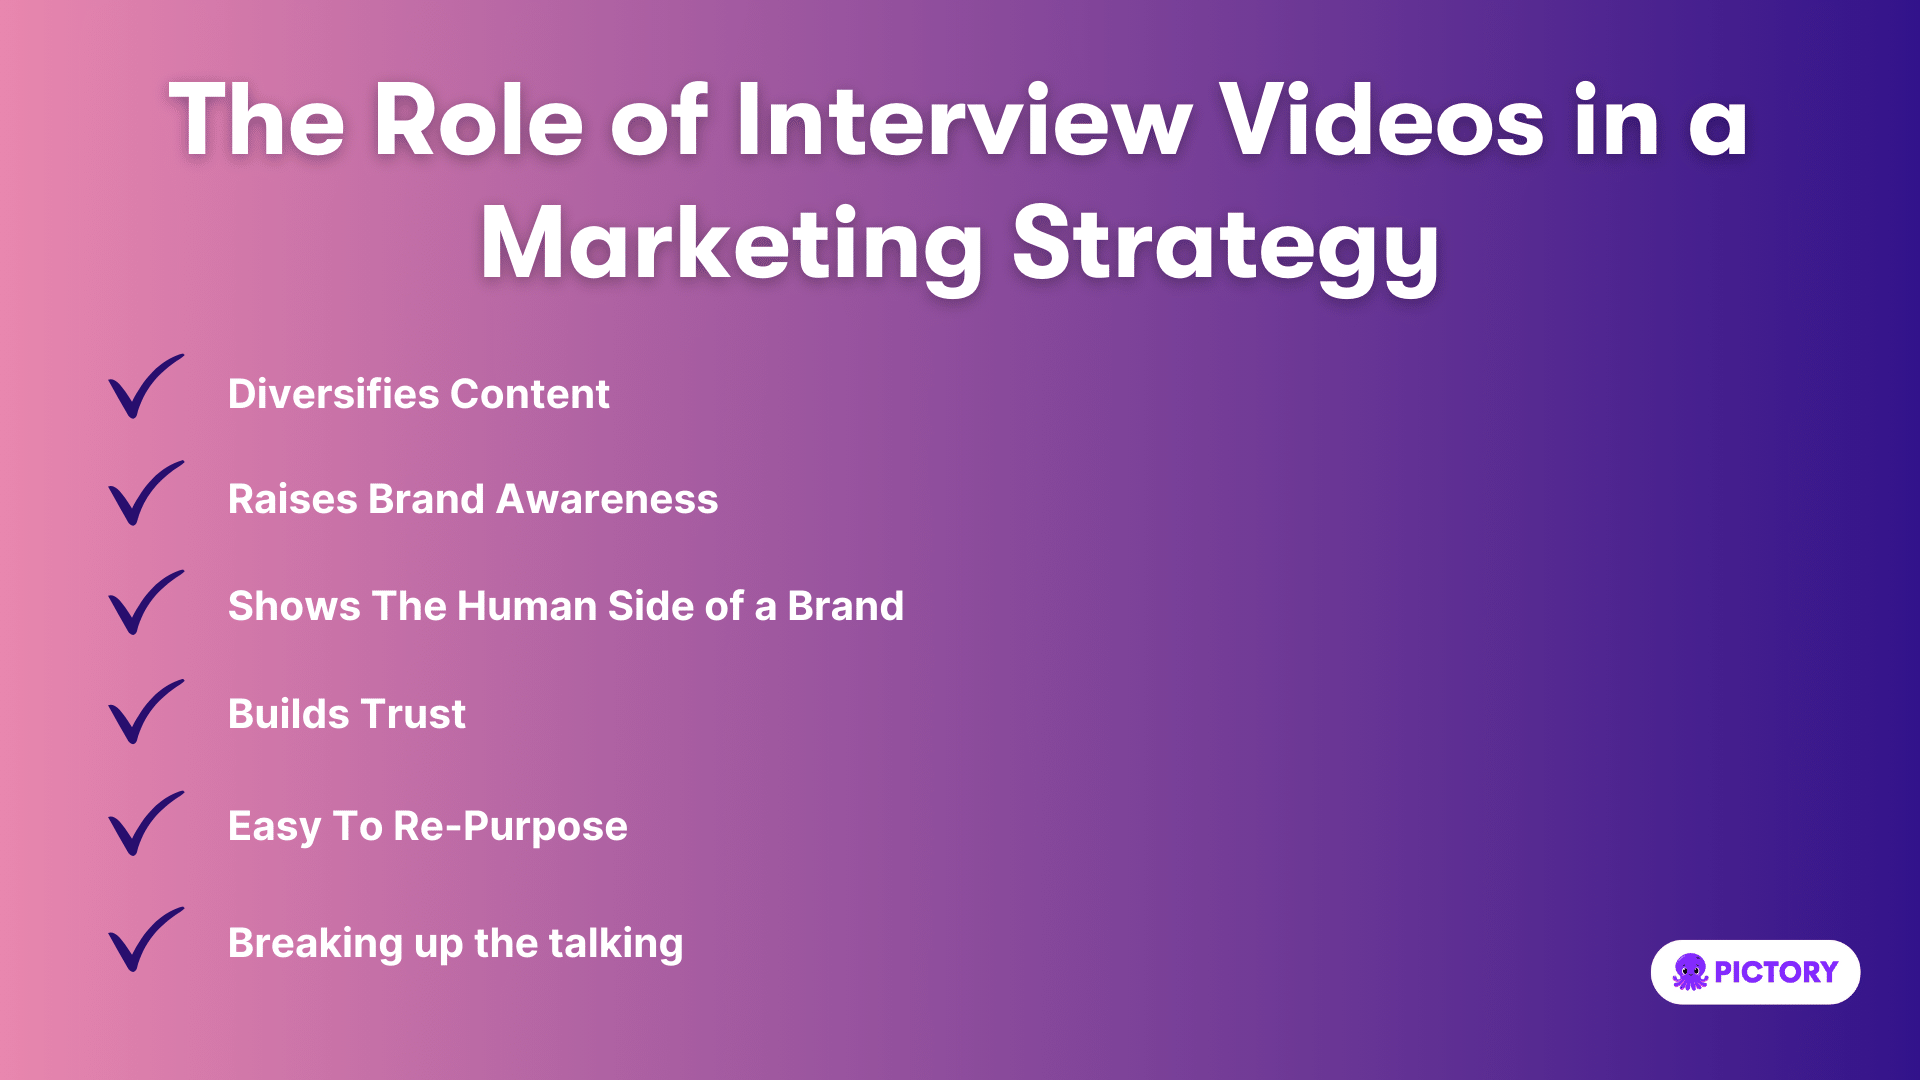 The Role of Interview Videos in a Marketing Strategy